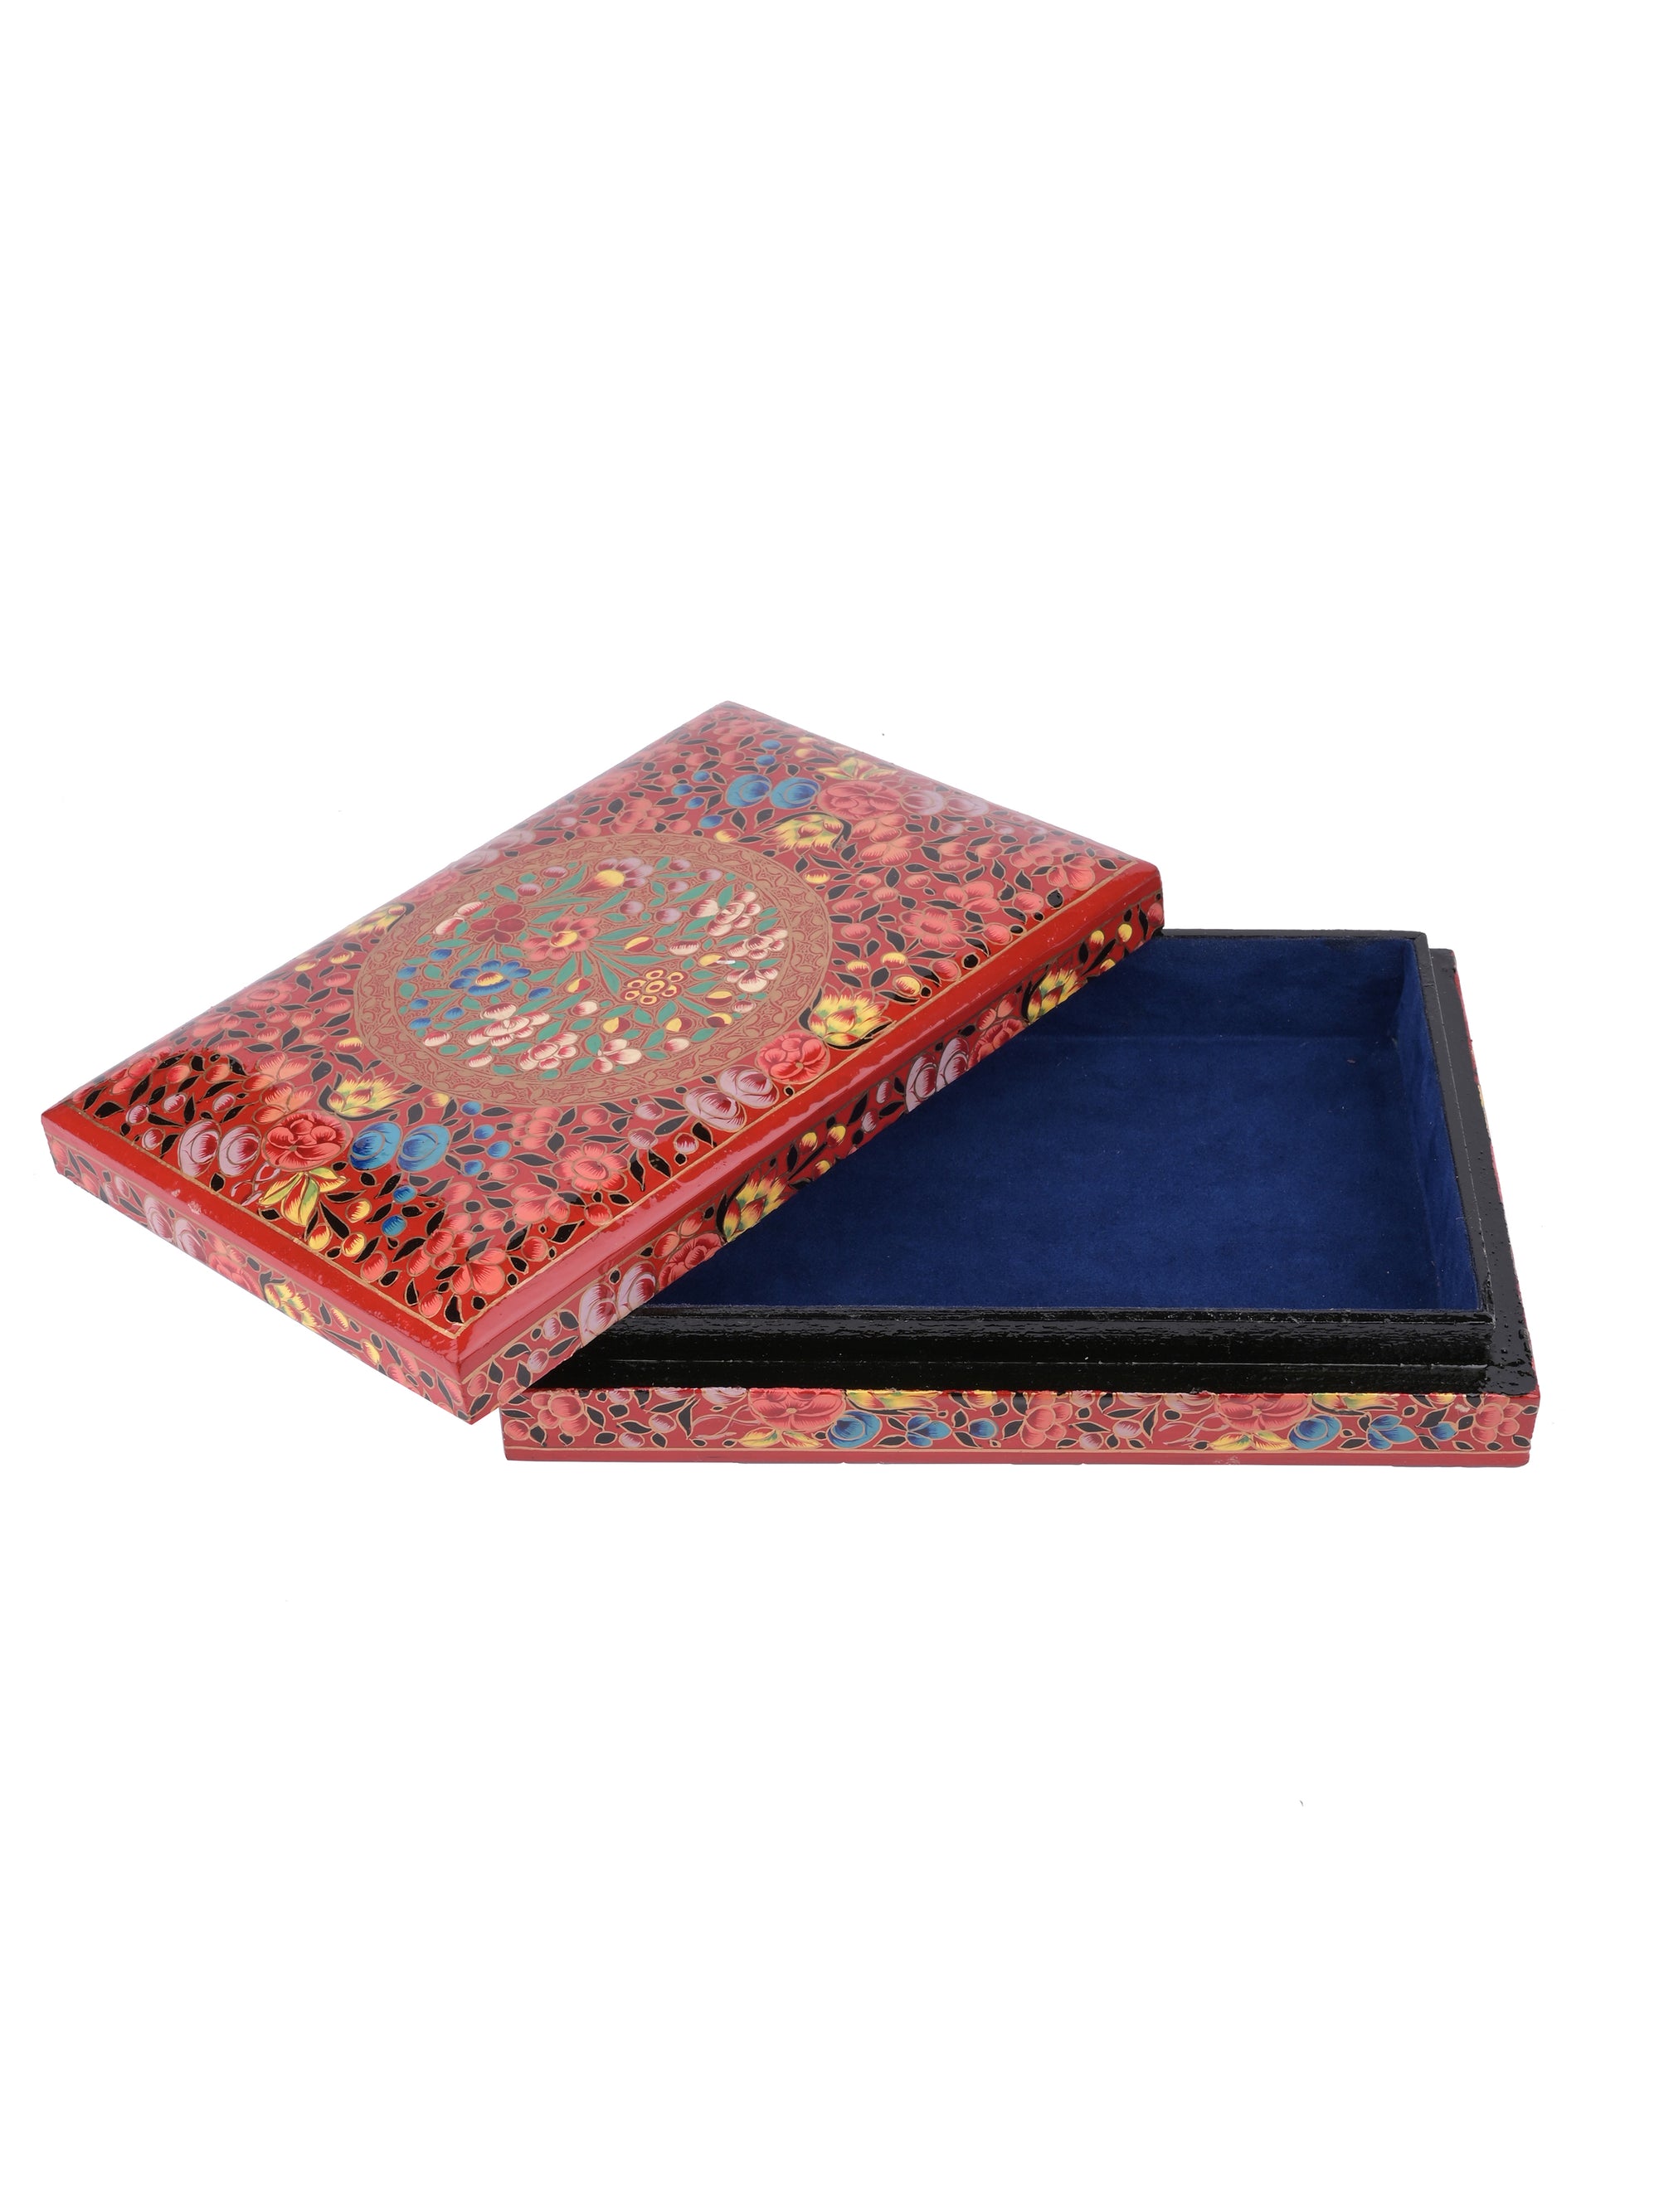 Rectangular Paper Mache Multi purpose storage box with Red floral pattern embossed - The Heritage Artifacts